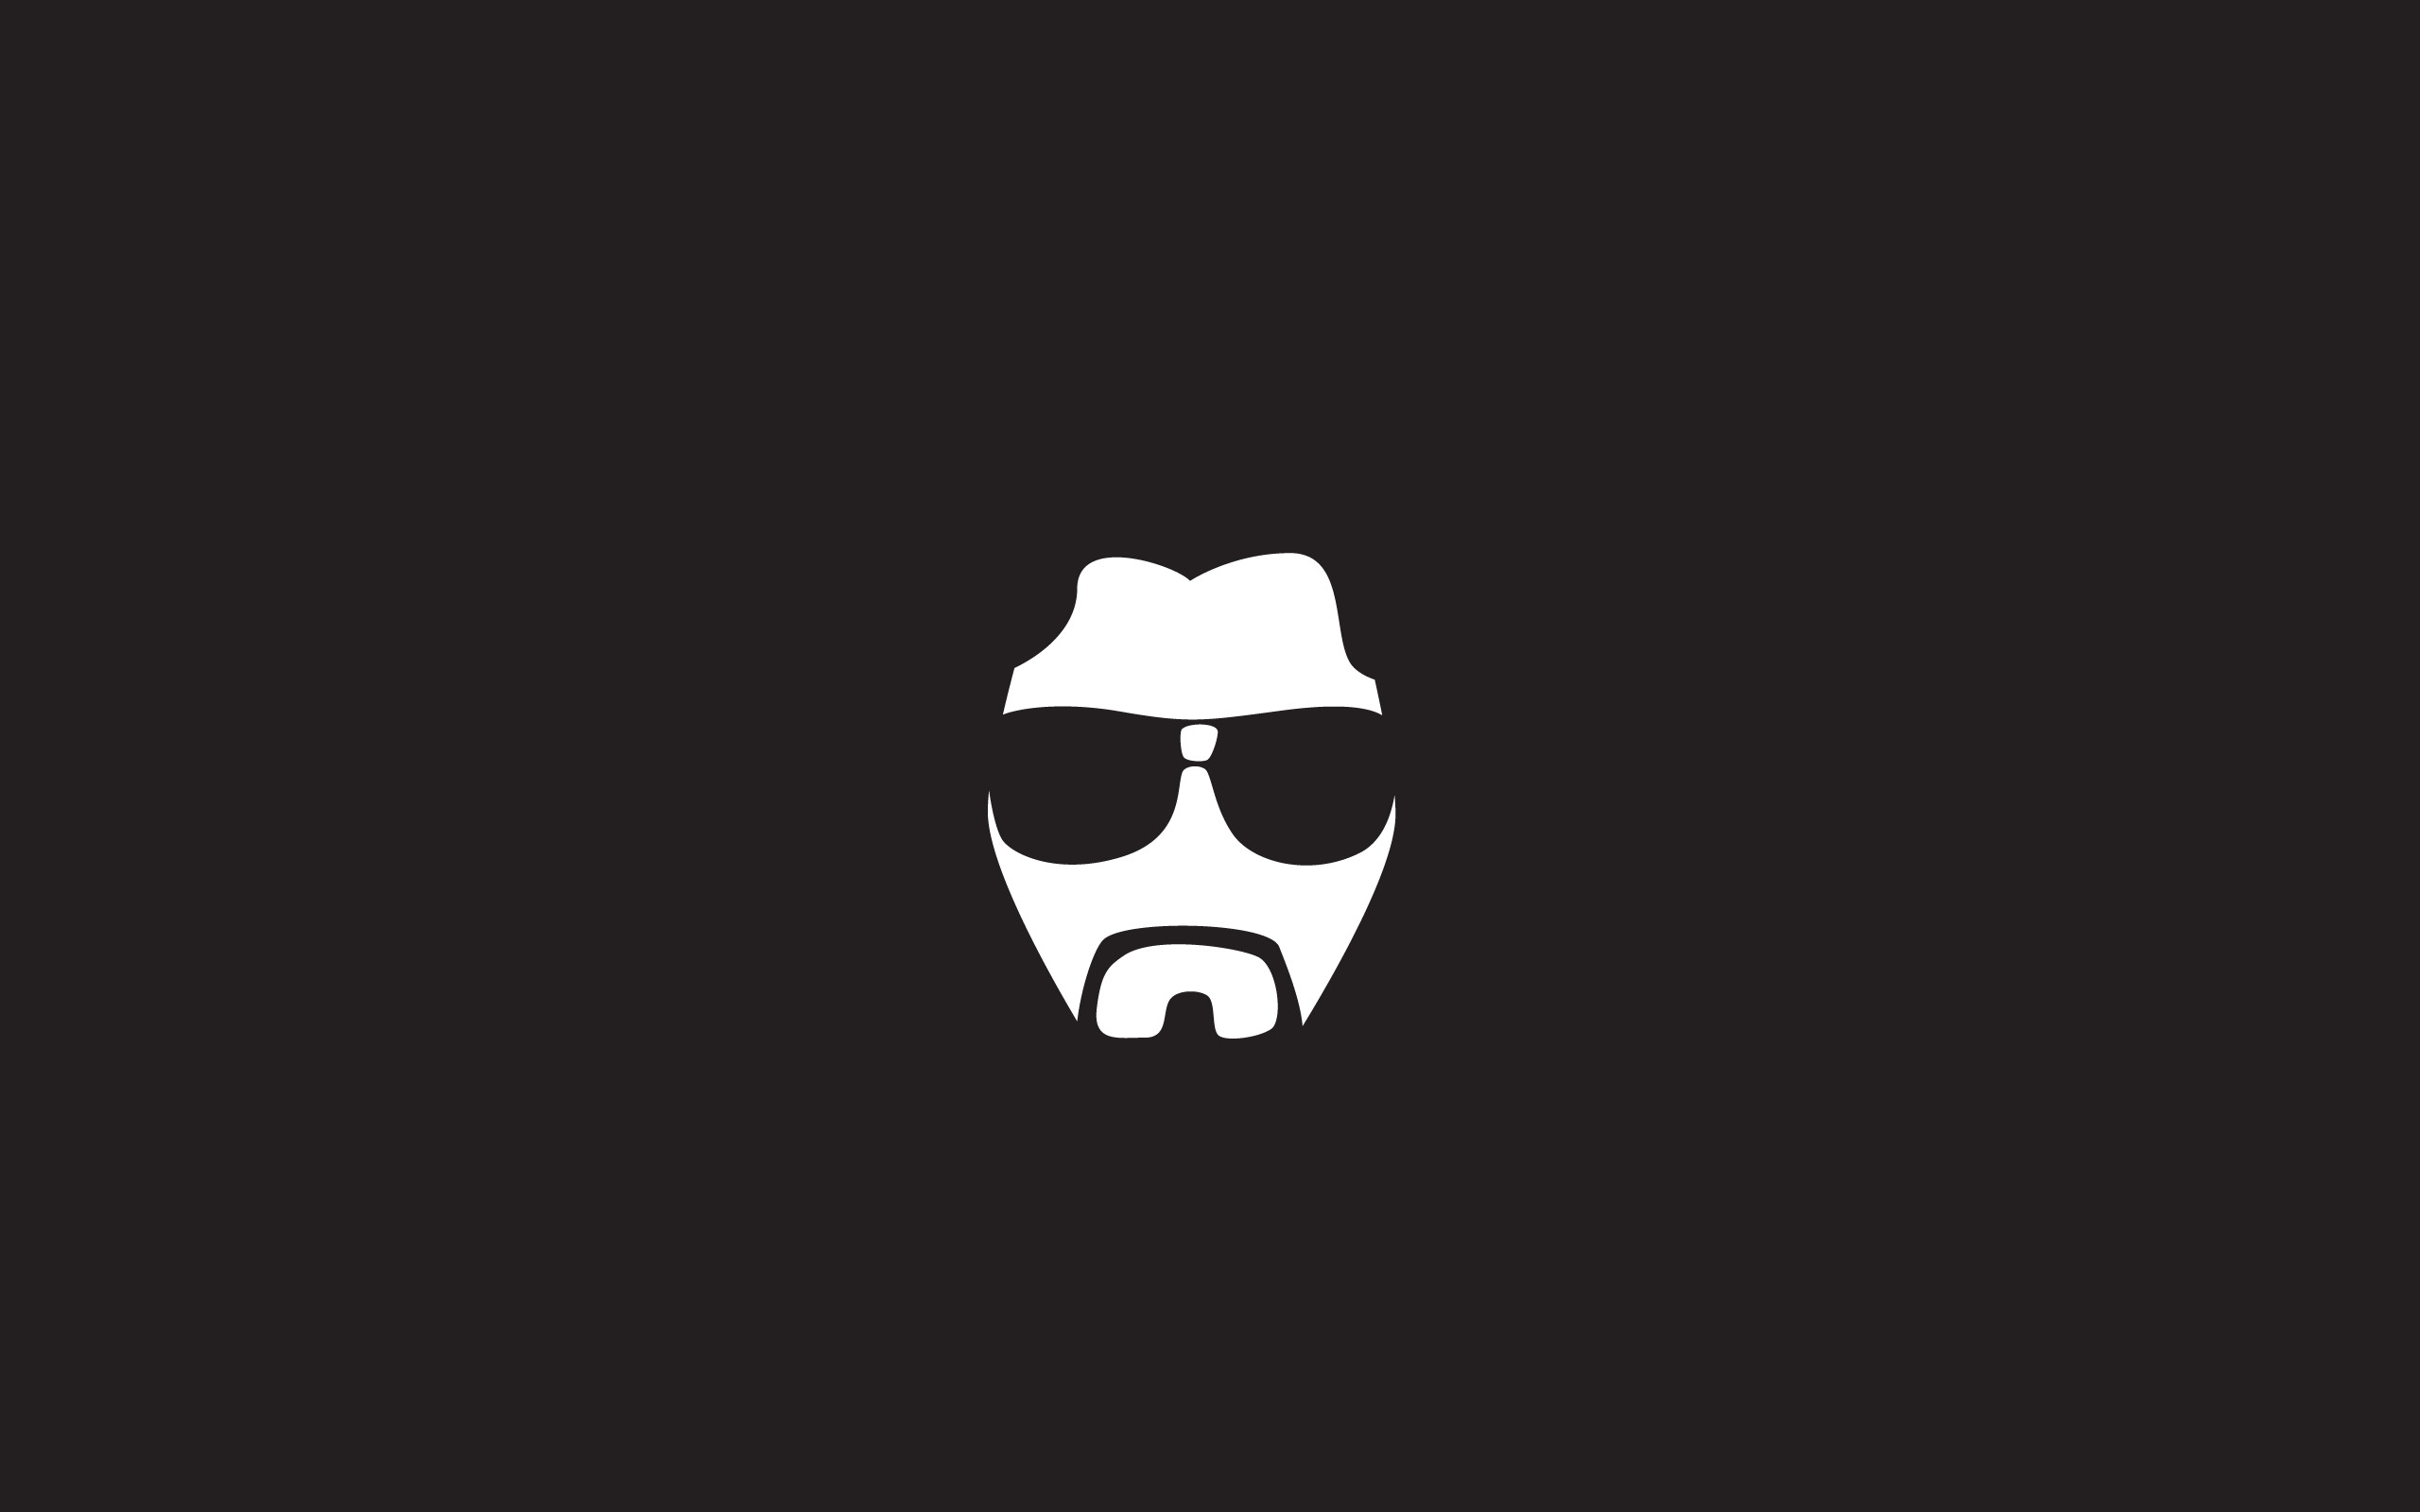 2560x1600 cool-simple-and-minimalist-desktop-wallpaper -the_dude_the_big_lebowski-cooked